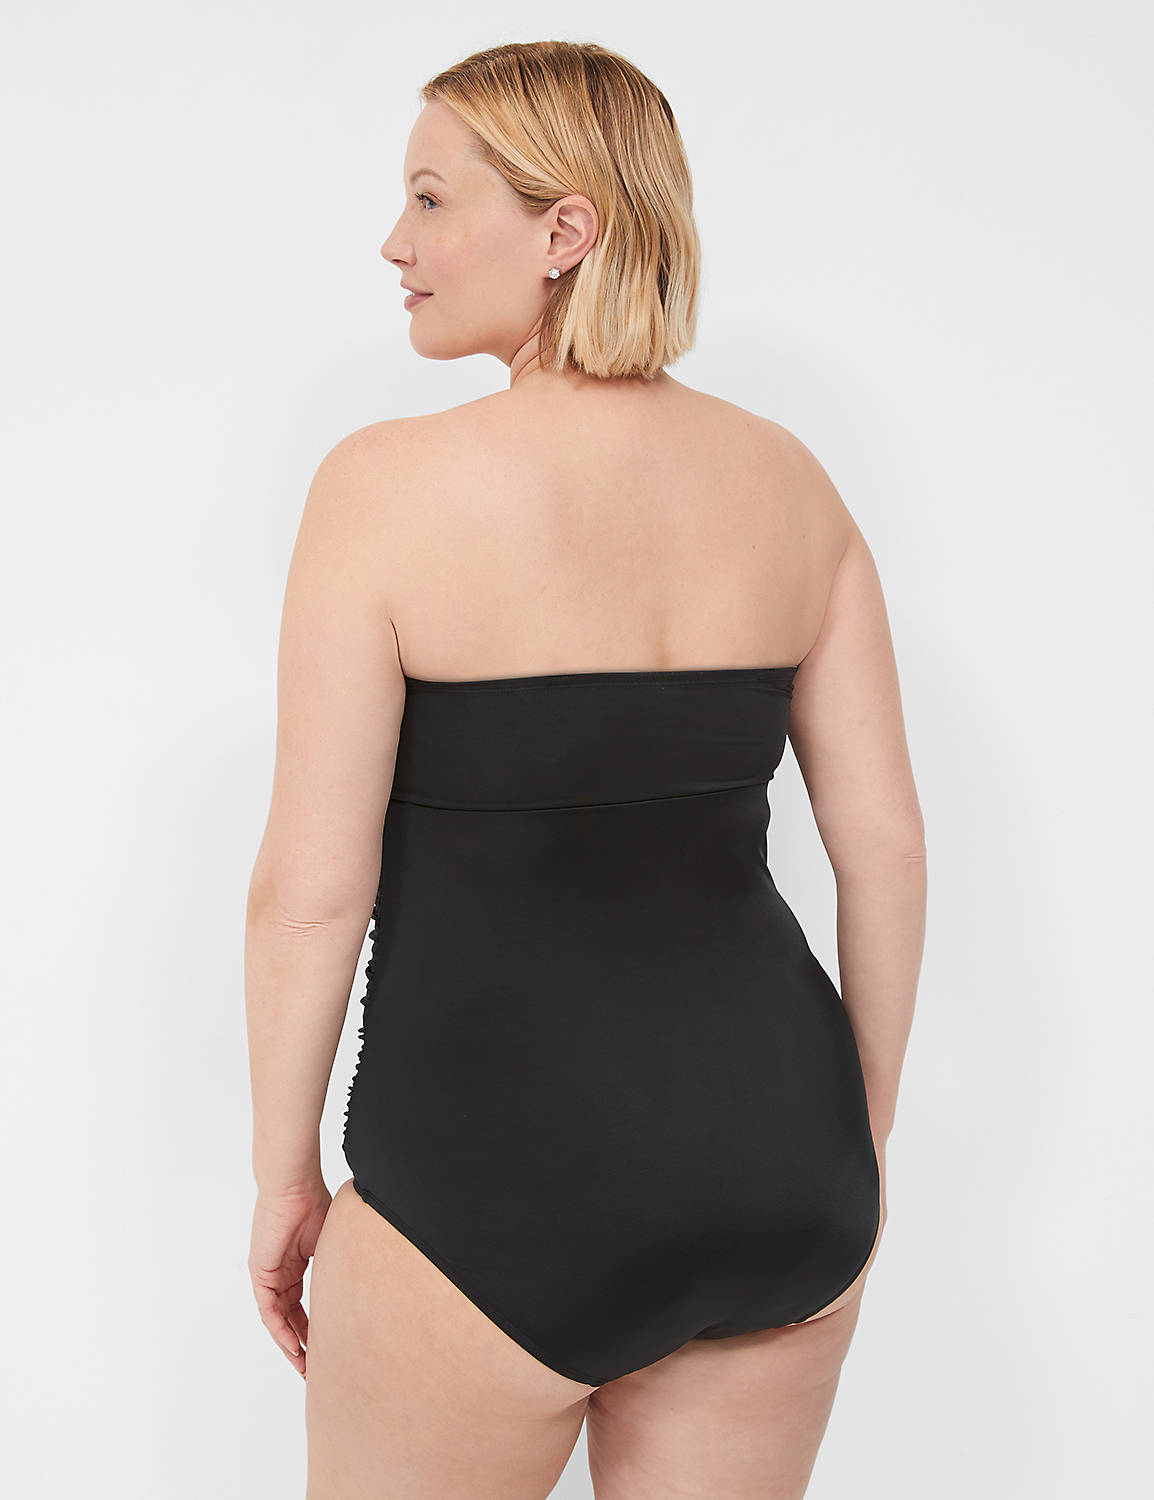 Strapless NW Brief One Piece 114051 Product Image 2